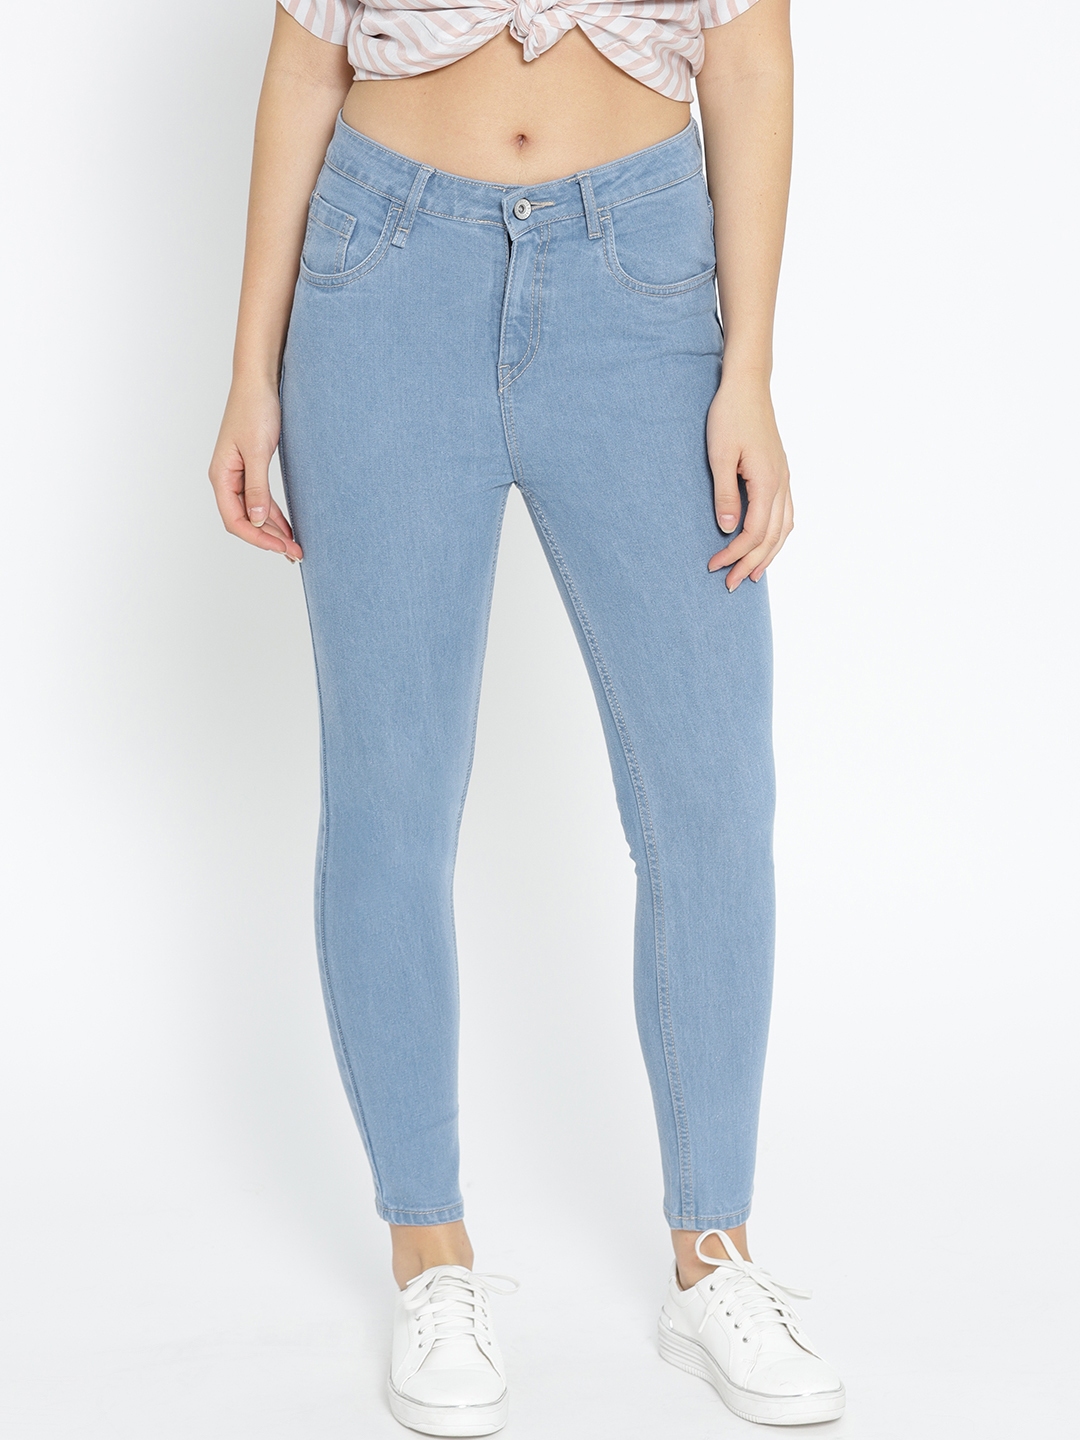 Buy The Roadster Lifestyle Co Women Blue Skinny Fit High Rise Clean Look Stretchable Cropped 